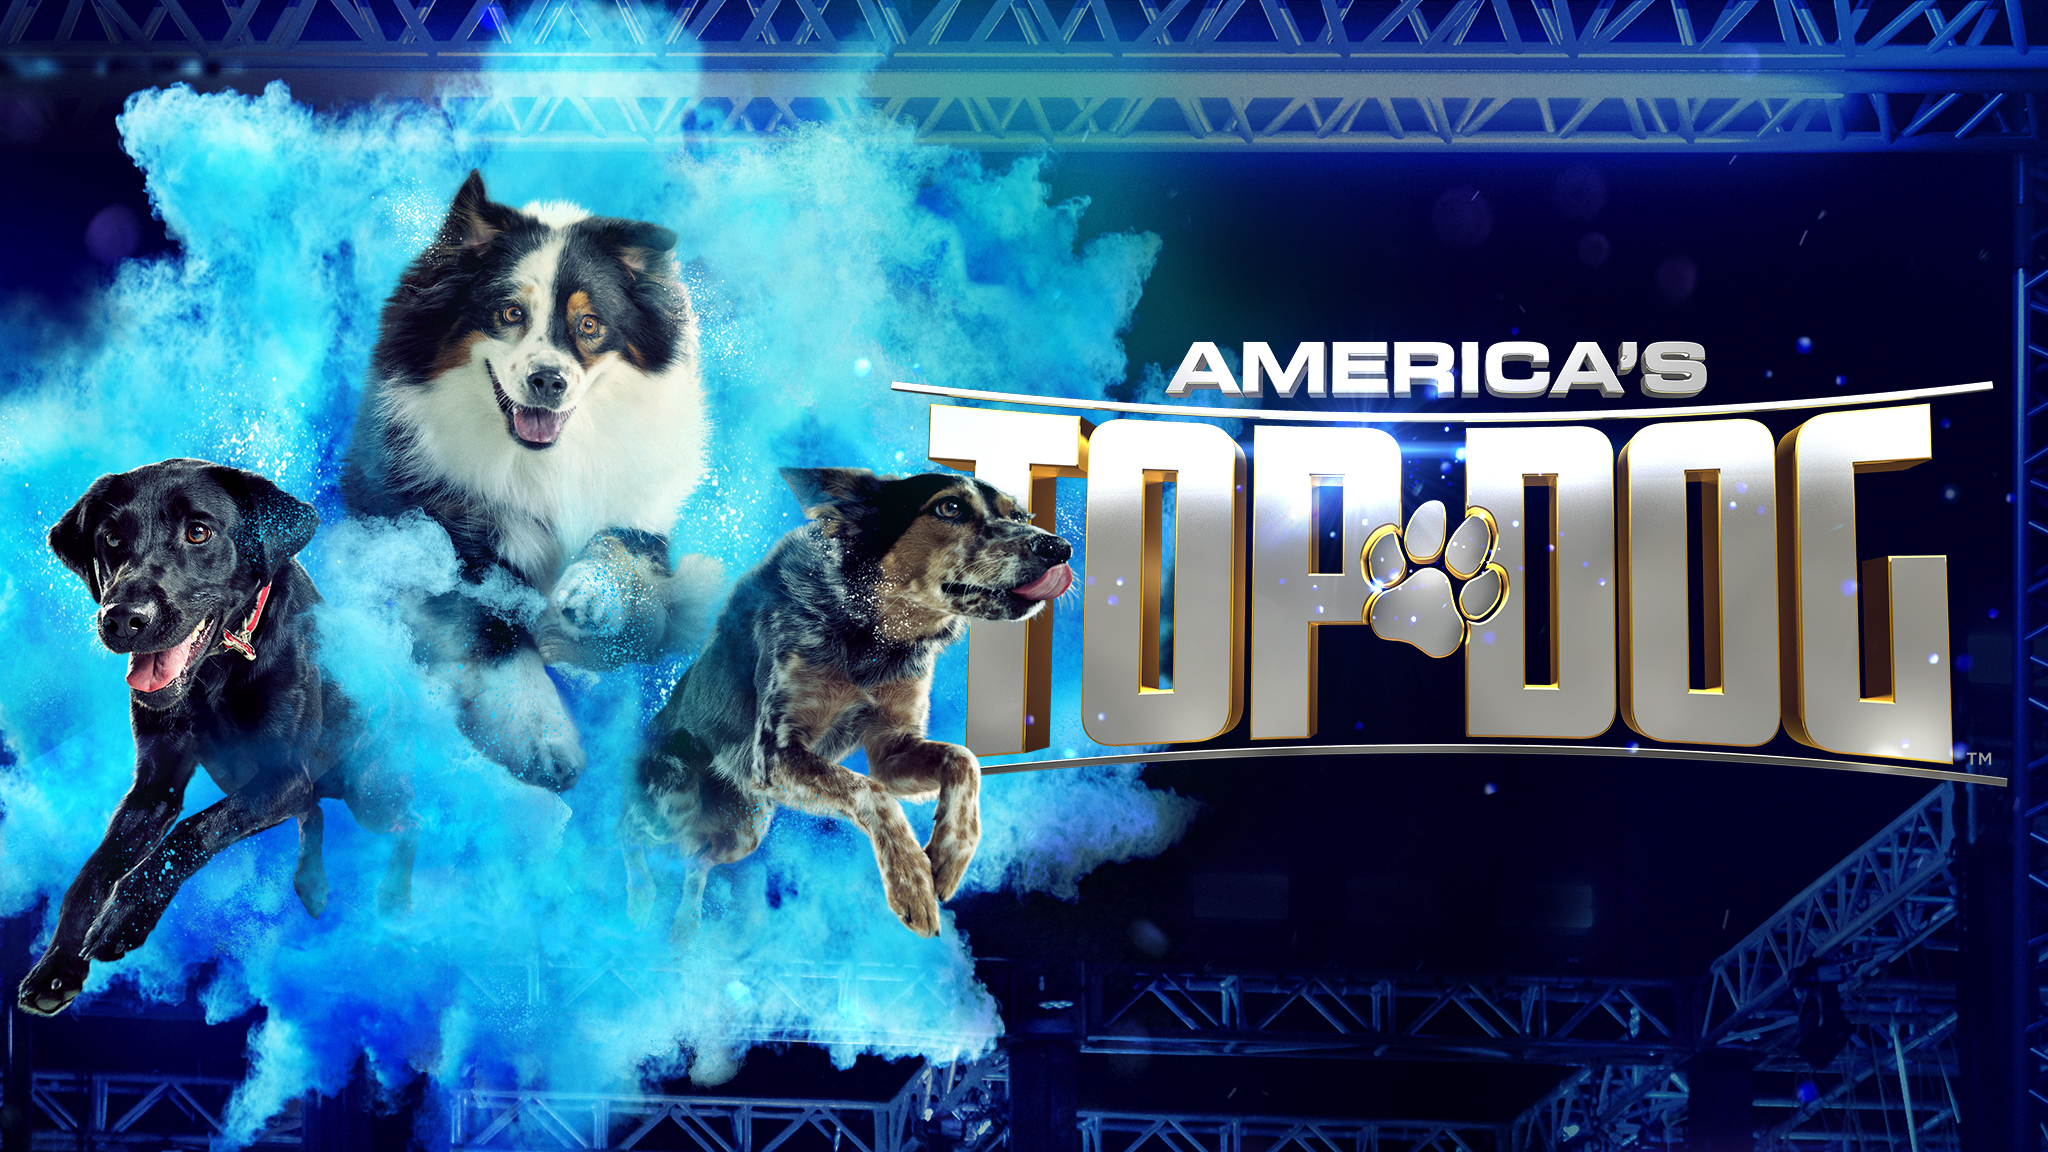 Afvist Drejning uvidenhed Watch America's Top Dog Full Episodes, Video & More | A&E